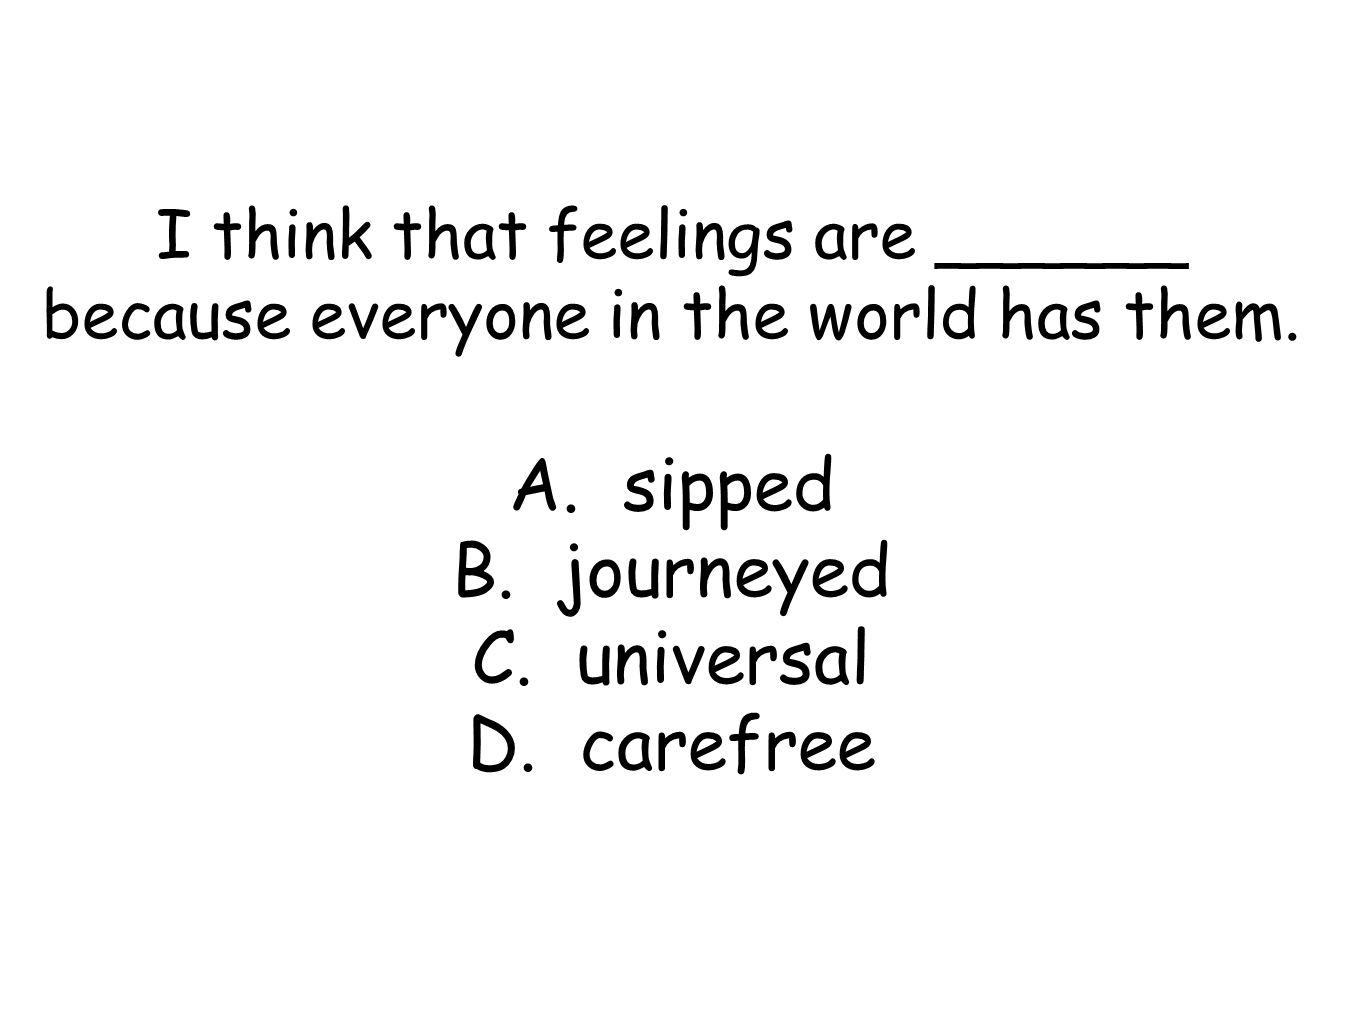 I think that feelings are ______ because everyone in the world has them.